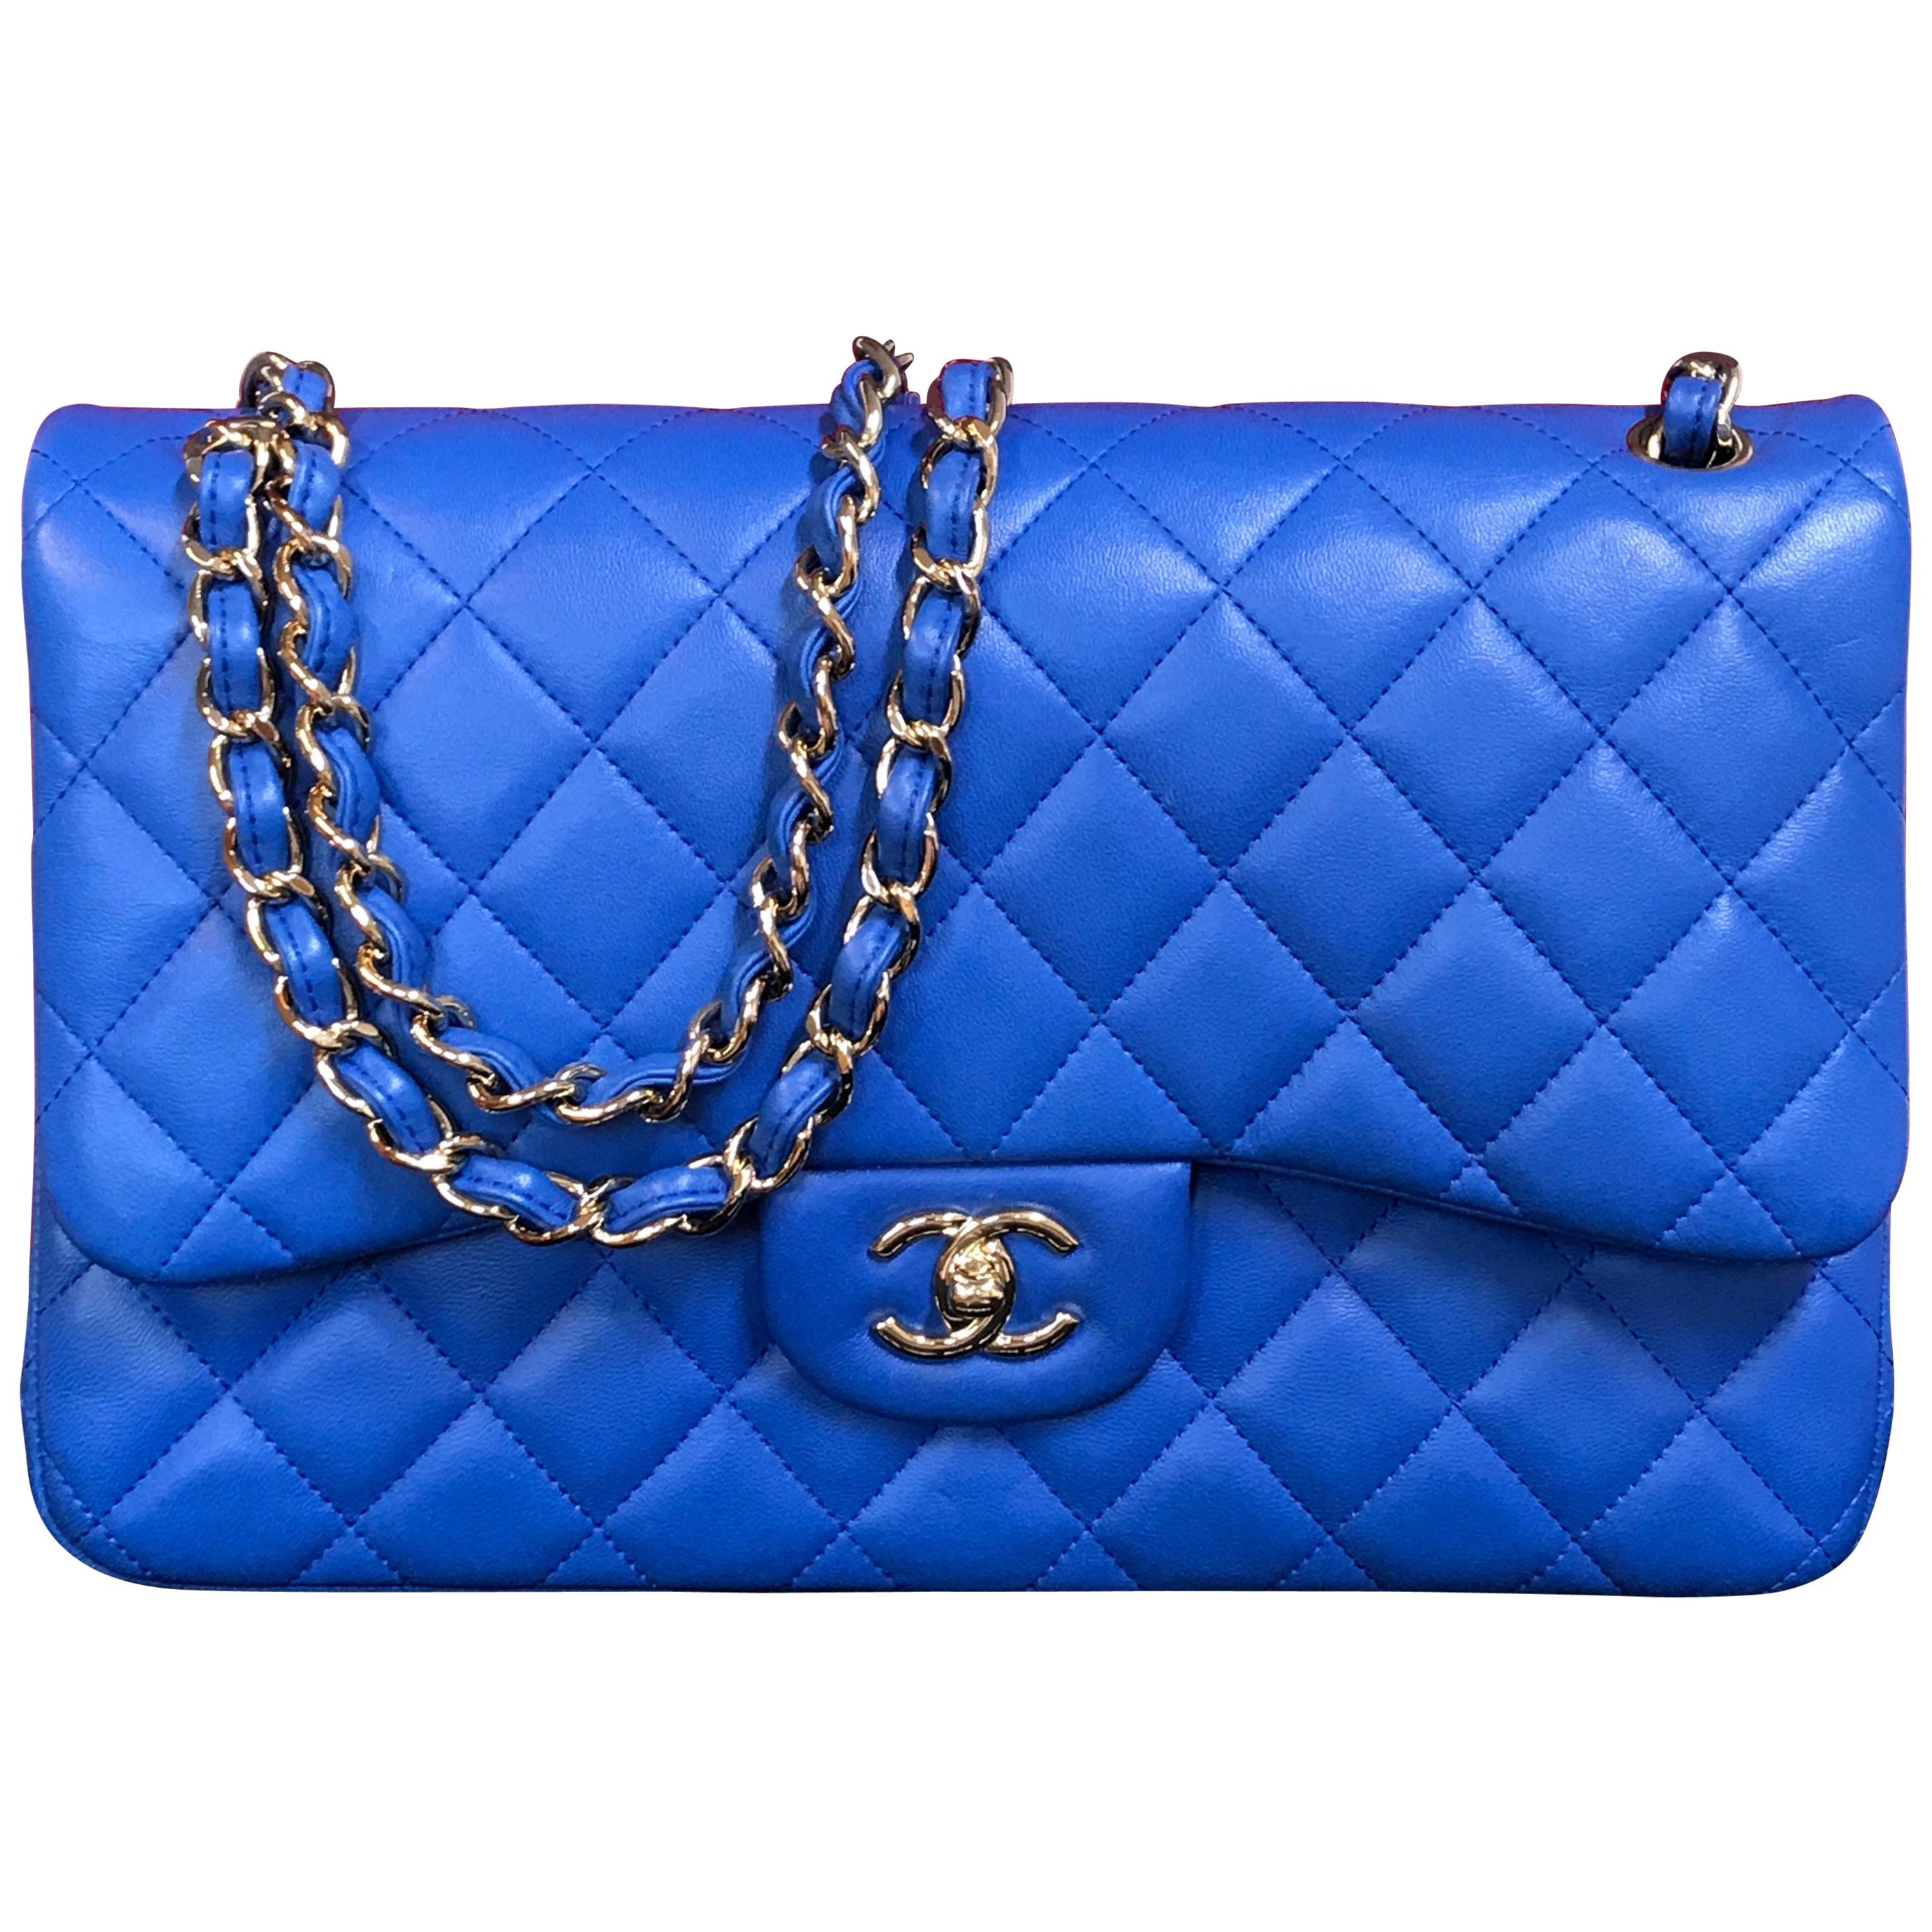 CHANEL double flap bag Jumbo blue shoulder bag quilted lambskin 2016 For Sale